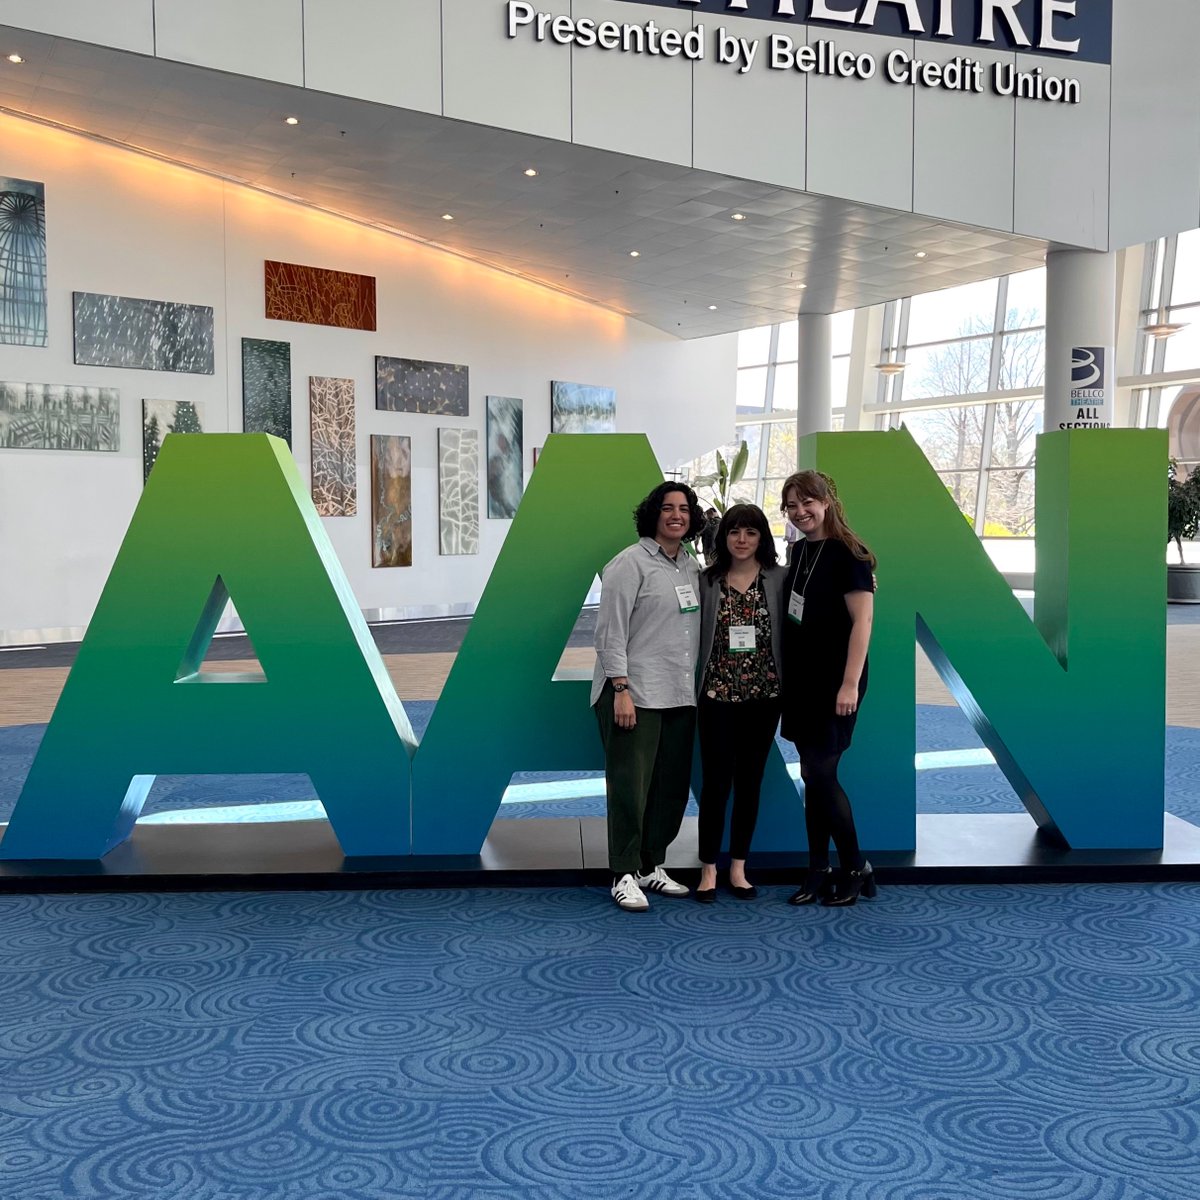 Another day of learning and connections at #AANAM! Engaging with experts and spreading our mission to raise awareness, build community, improve care and find a cure for PSP, CBD and MSA.